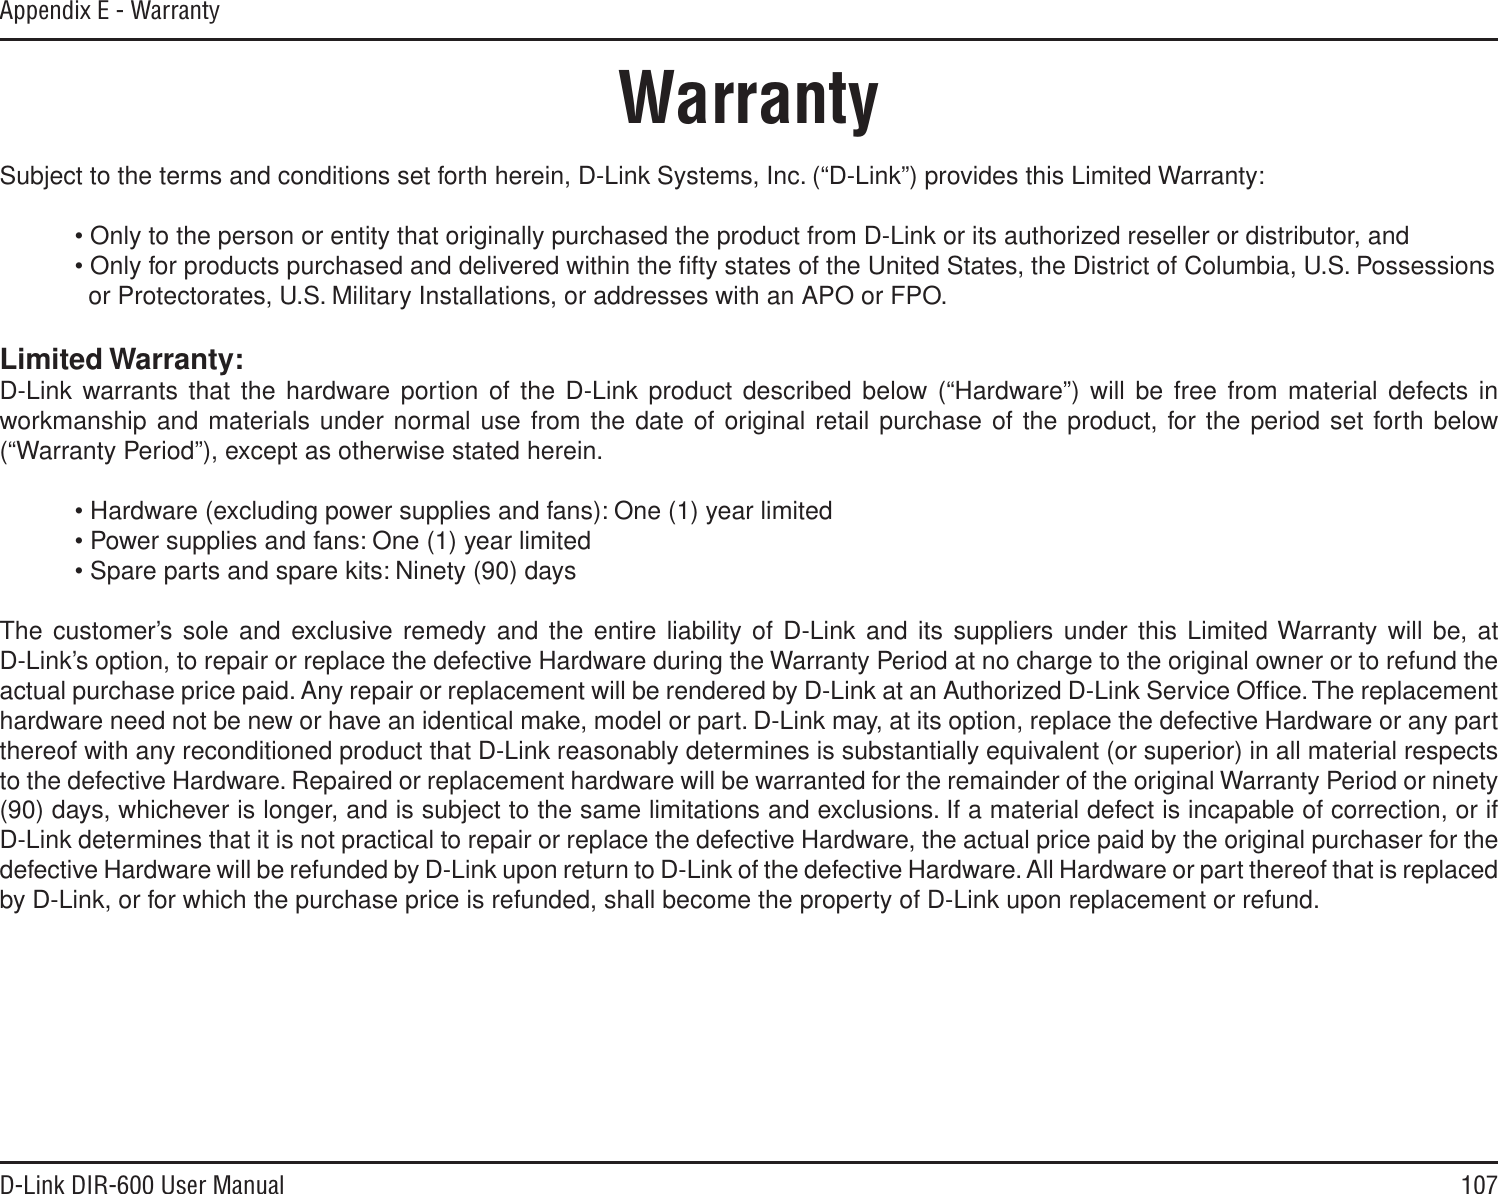 107D-Link DIR-600 User ManualAppendix E - WarrantyWarrantySubject to the terms and conditions set forth herein, D-Link Systems, Inc. (“D-Link”) provides this Limited Warranty:• Only to the person or entity that originally purchased the product from D-Link or its authorized reseller or distributor, and• Only for products purchased and delivered within the ﬁfty states of the United States, the District of Columbia, U.S. Possessions   or Protectorates, U.S. Military Installations, or addresses with an APO or FPO.Limited Warranty:D-Link warrants that the hardware portion of the D-Link product described below (“Hardware”) will be free from material defects in workmanship and materials under normal use from the date of original retail purchase of the product, for the period set forth below (“Warranty Period”), except as otherwise stated herein.• Hardware (excluding power supplies and fans): One (1) year limited• Power supplies and fans: One (1) year limited• Spare parts and spare kits: Ninety (90) daysThe customer’s sole and exclusive remedy and the entire liability of D-Link and its suppliers under this Limited Warranty will be, at D-Link’s option, to repair or replace the defective Hardware during the Warranty Period at no charge to the original owner or to refund the actual purchase price paid. Any repair or replacement will be rendered by D-Link at an Authorized D-Link Service Ofﬁce. The replacement hardware need not be new or have an identical make, model or part. D-Link may, at its option, replace the defective Hardware or any part thereof with any reconditioned product that D-Link reasonably determines is substantially equivalent (or superior) in all material respects to the defective Hardware. Repaired or replacement hardware will be warranted for the remainder of the original Warranty Period or ninety (90) days, whichever is longer, and is subject to the same limitations and exclusions. If a material defect is incapable of correction, or if D-Link determines that it is not practical to repair or replace the defective Hardware, the actual price paid by the original purchaser for the defective Hardware will be refunded by D-Link upon return to D-Link of the defective Hardware. All Hardware or part thereof that is replaced by D-Link, or for which the purchase price is refunded, shall become the property of D-Link upon replacement or refund.